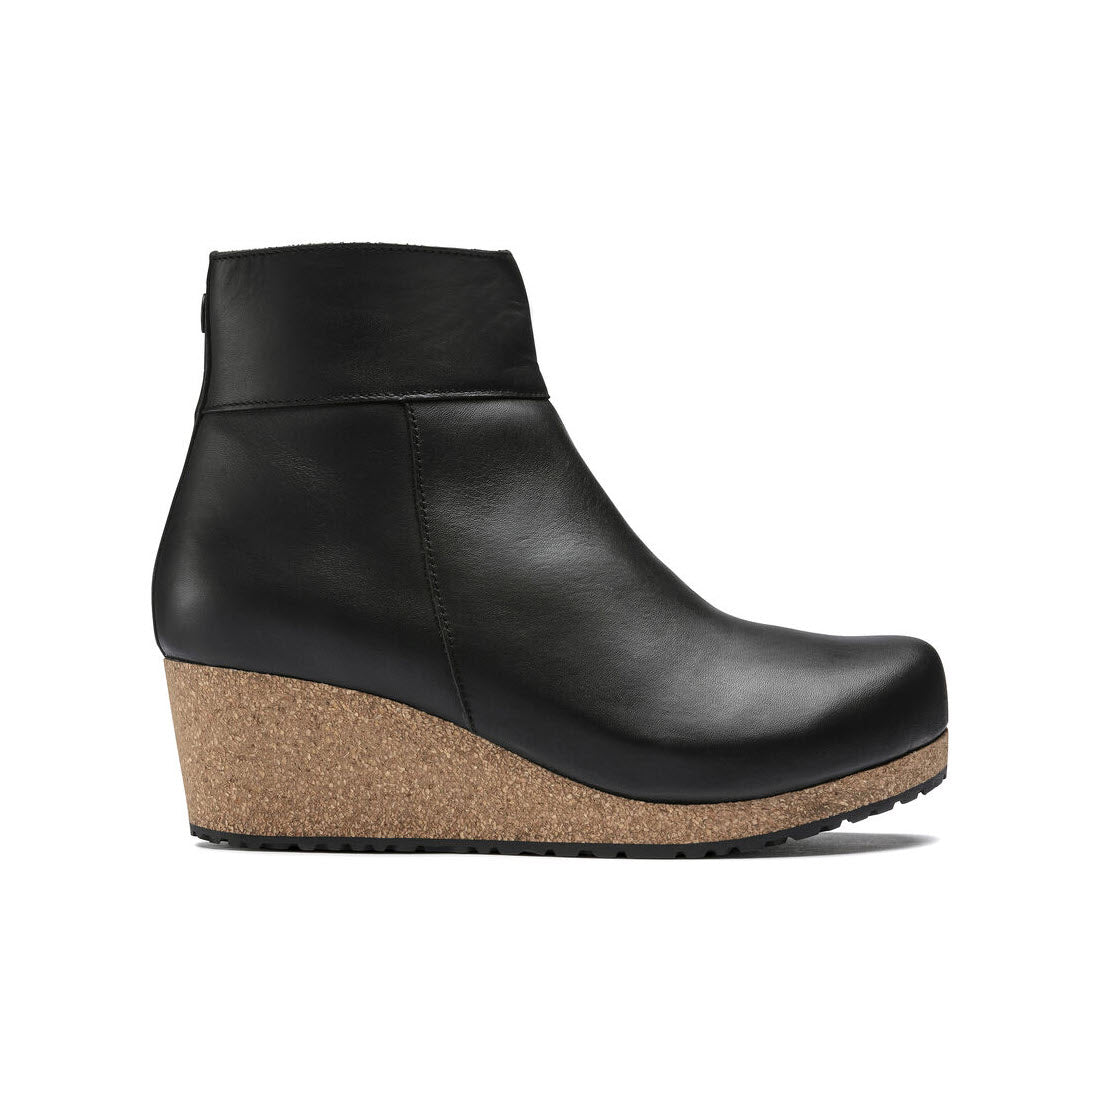 Birkenstock Papillio Ebba black leather wedge ankle boot with a contoured footbed and a cork platform sole, photographed on a white background.